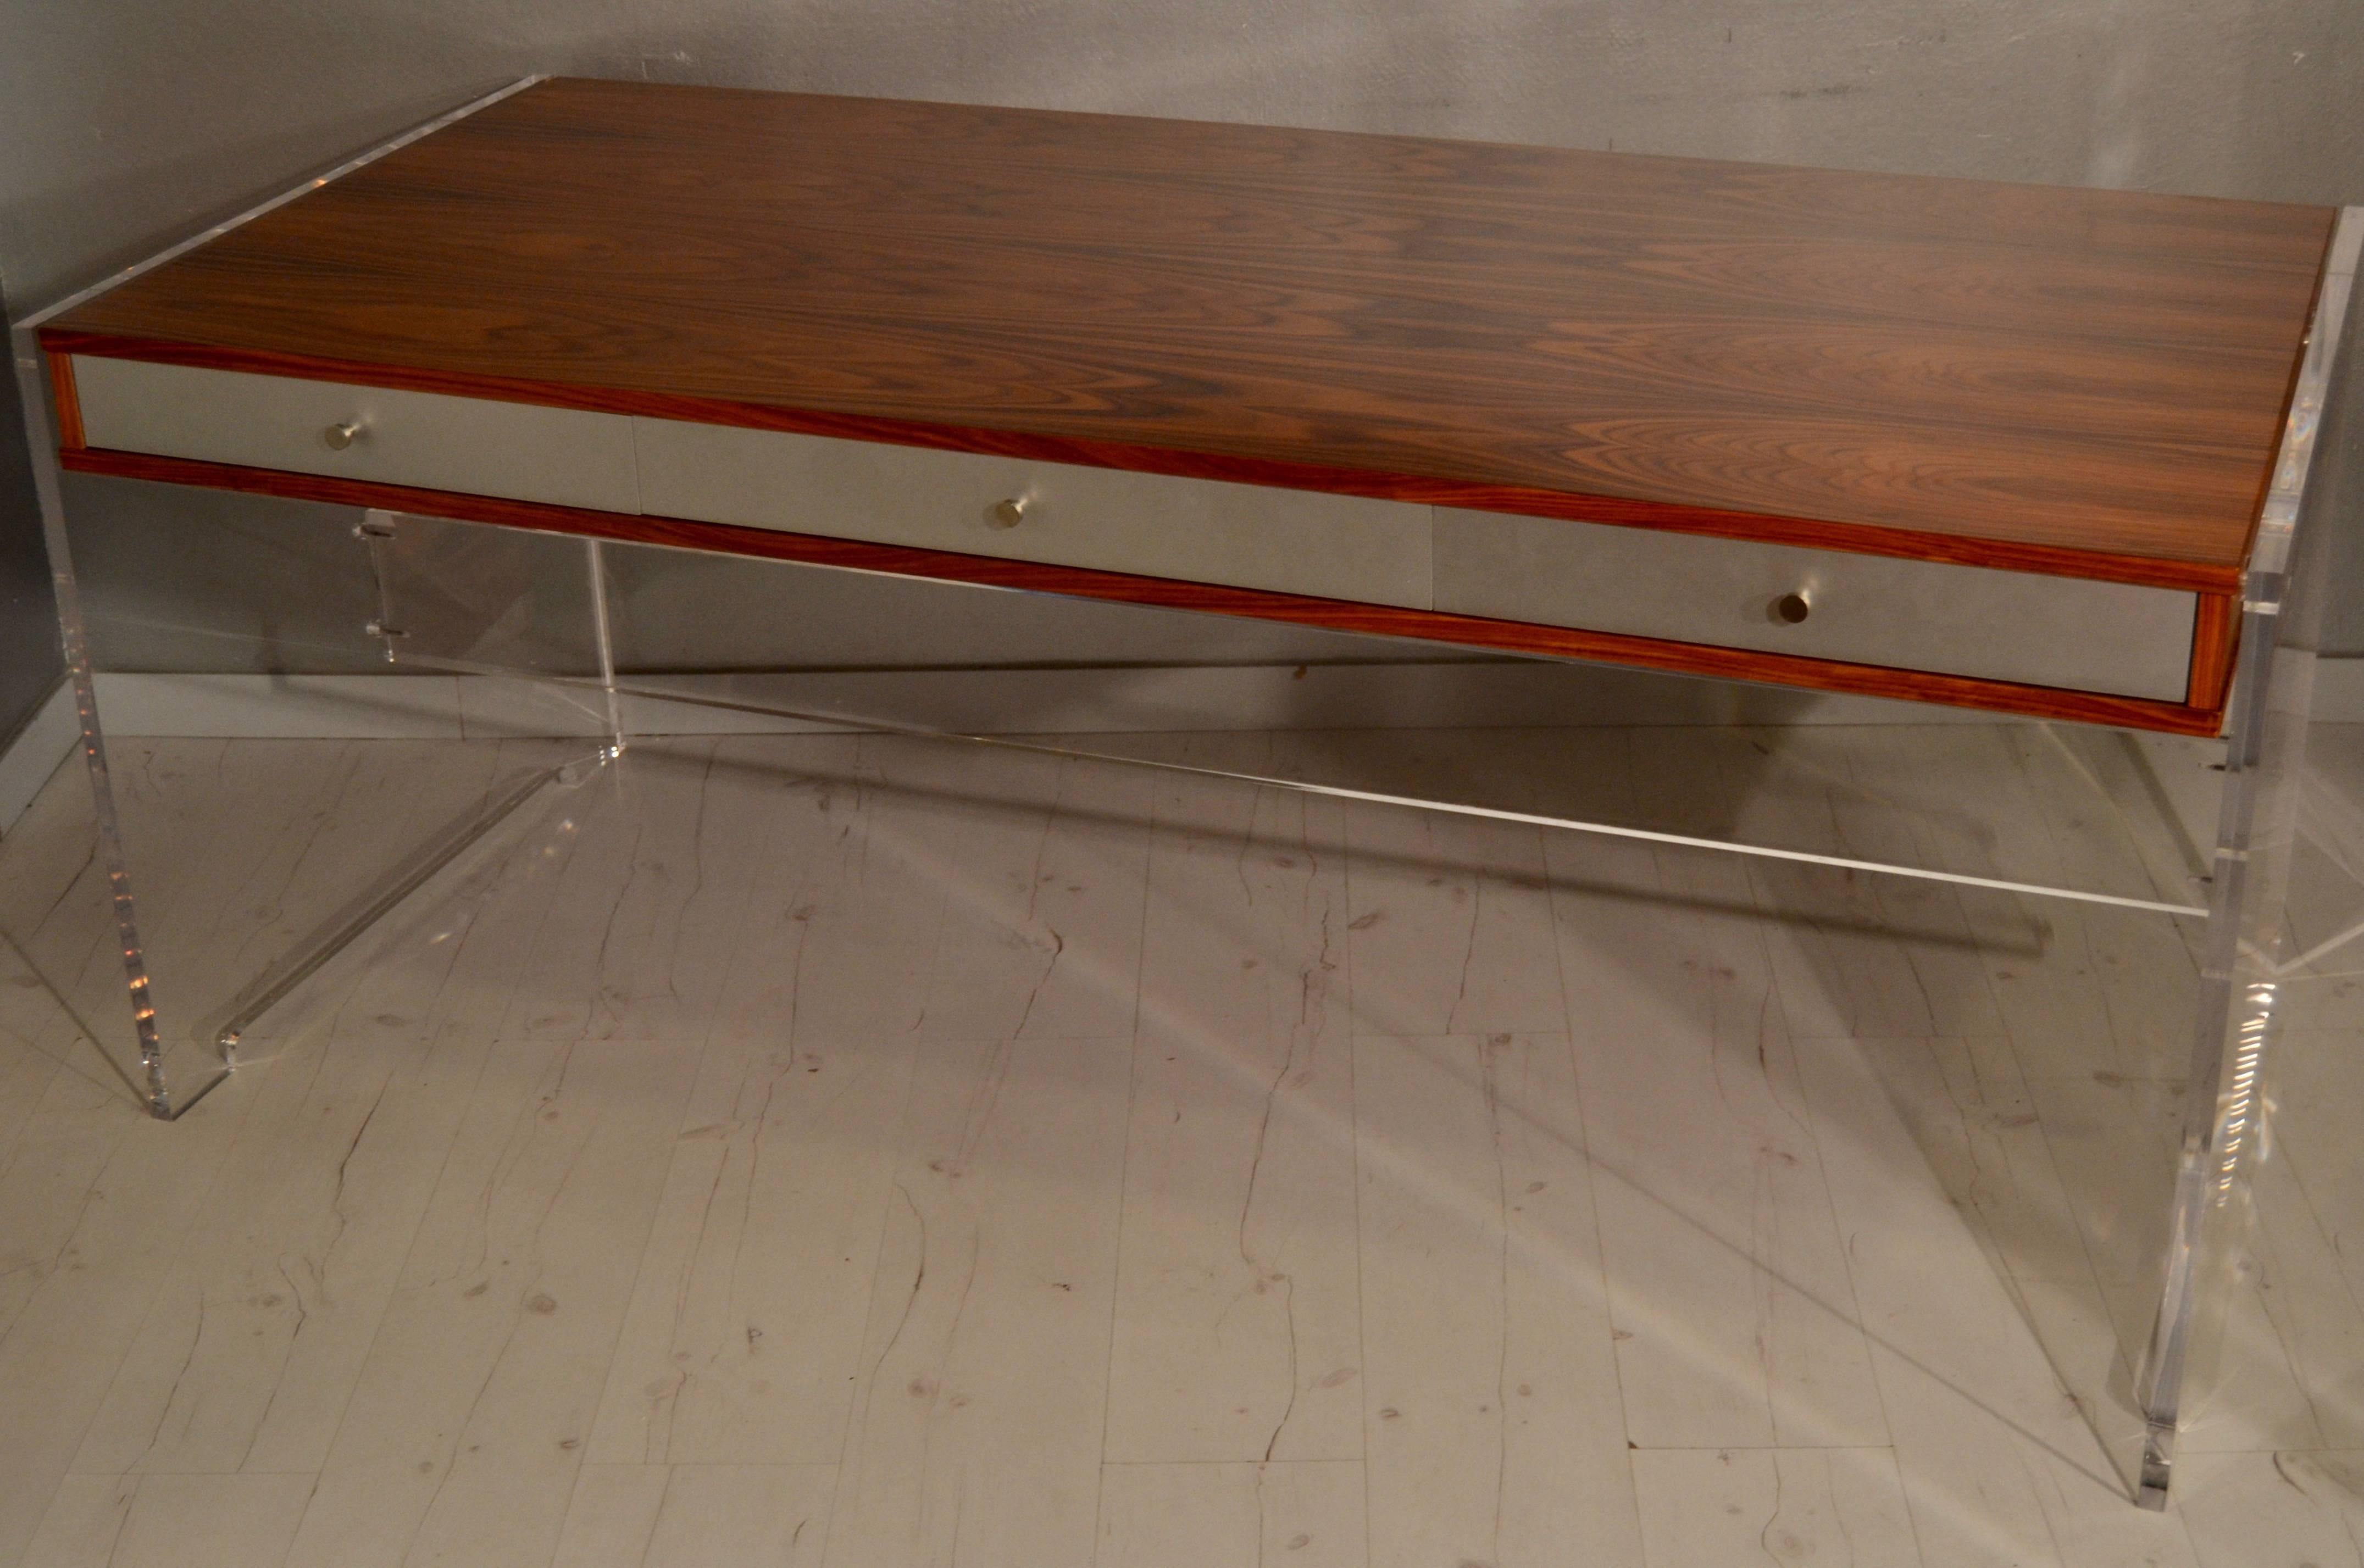 Danish Poul Norreklit Desk in Mahogany and Lucite